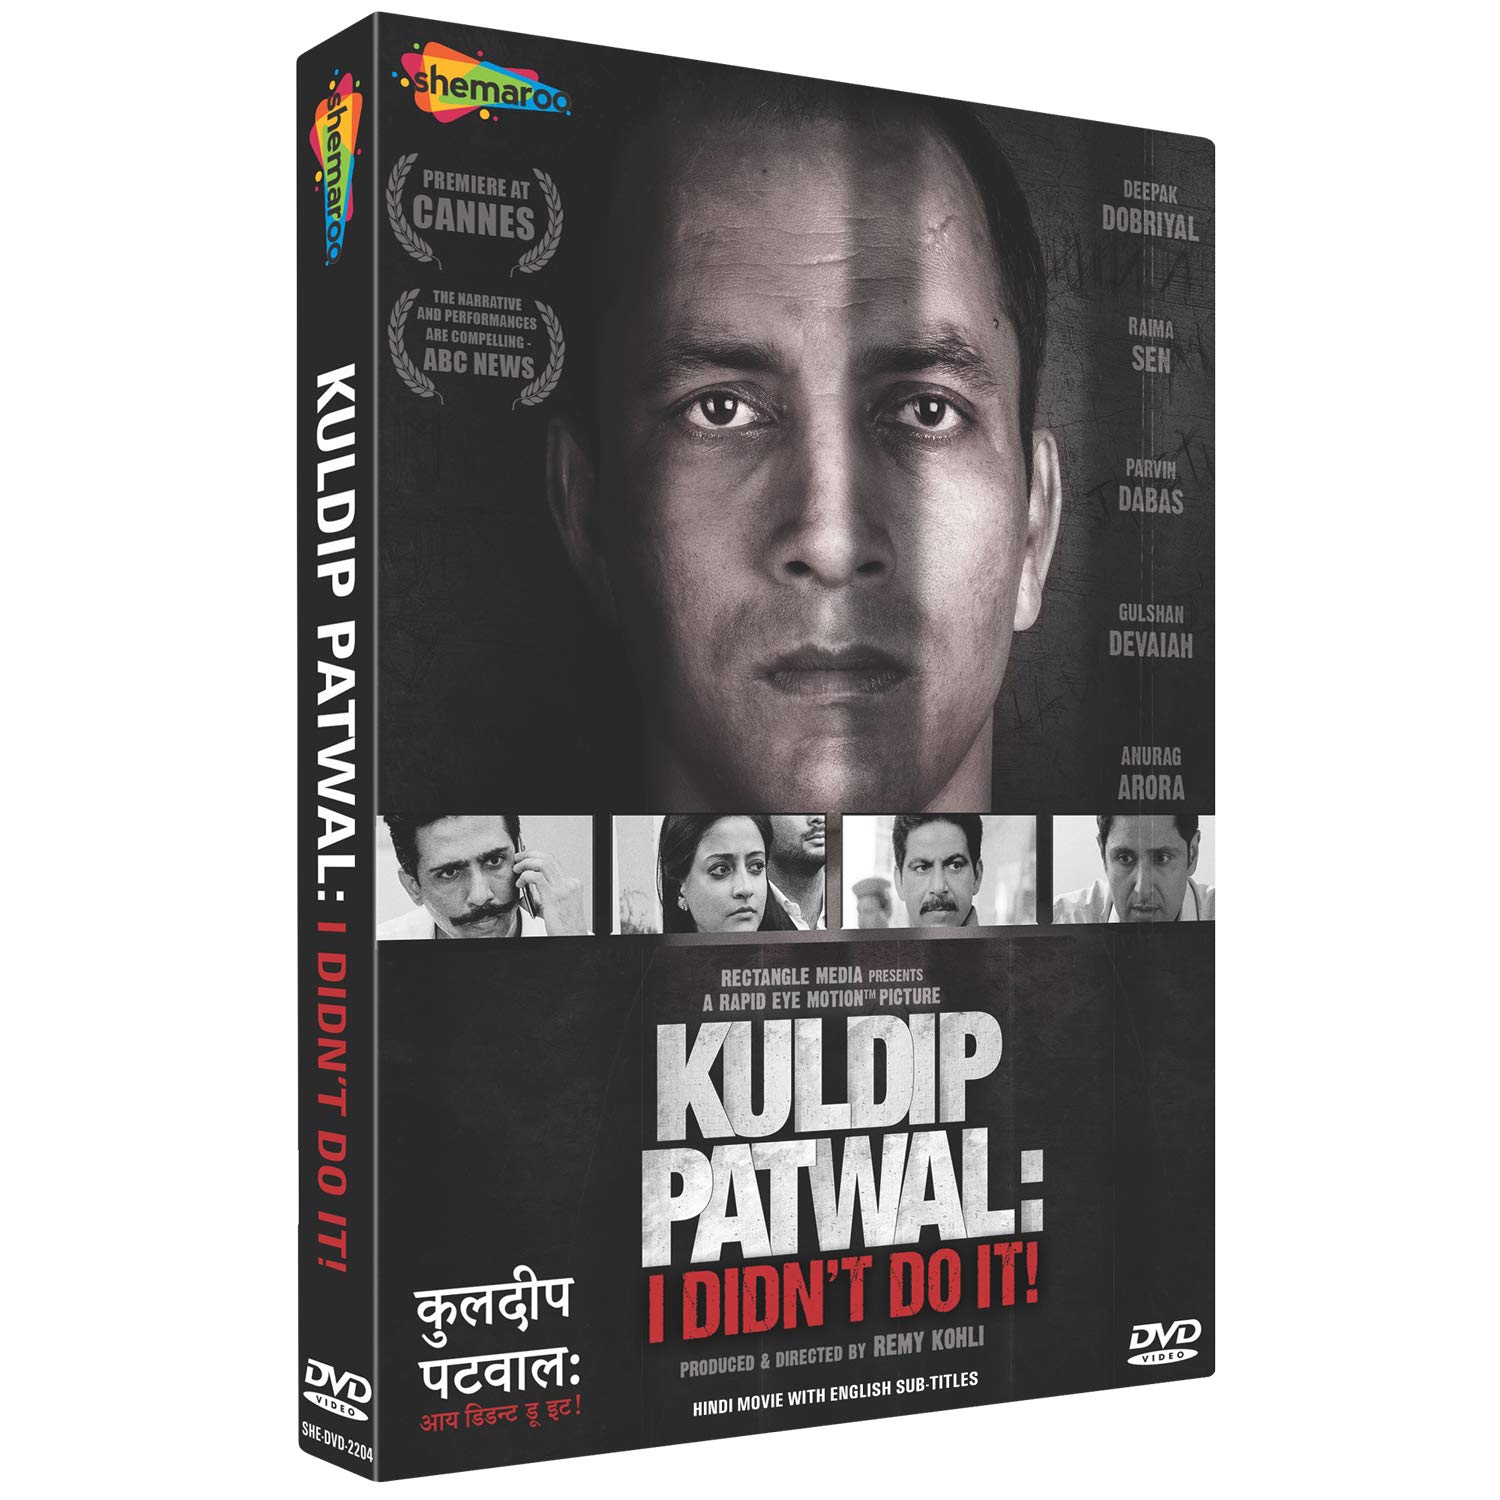 kuldip-patwal-i-didnt-do-it-movie-purchase-or-watch-online